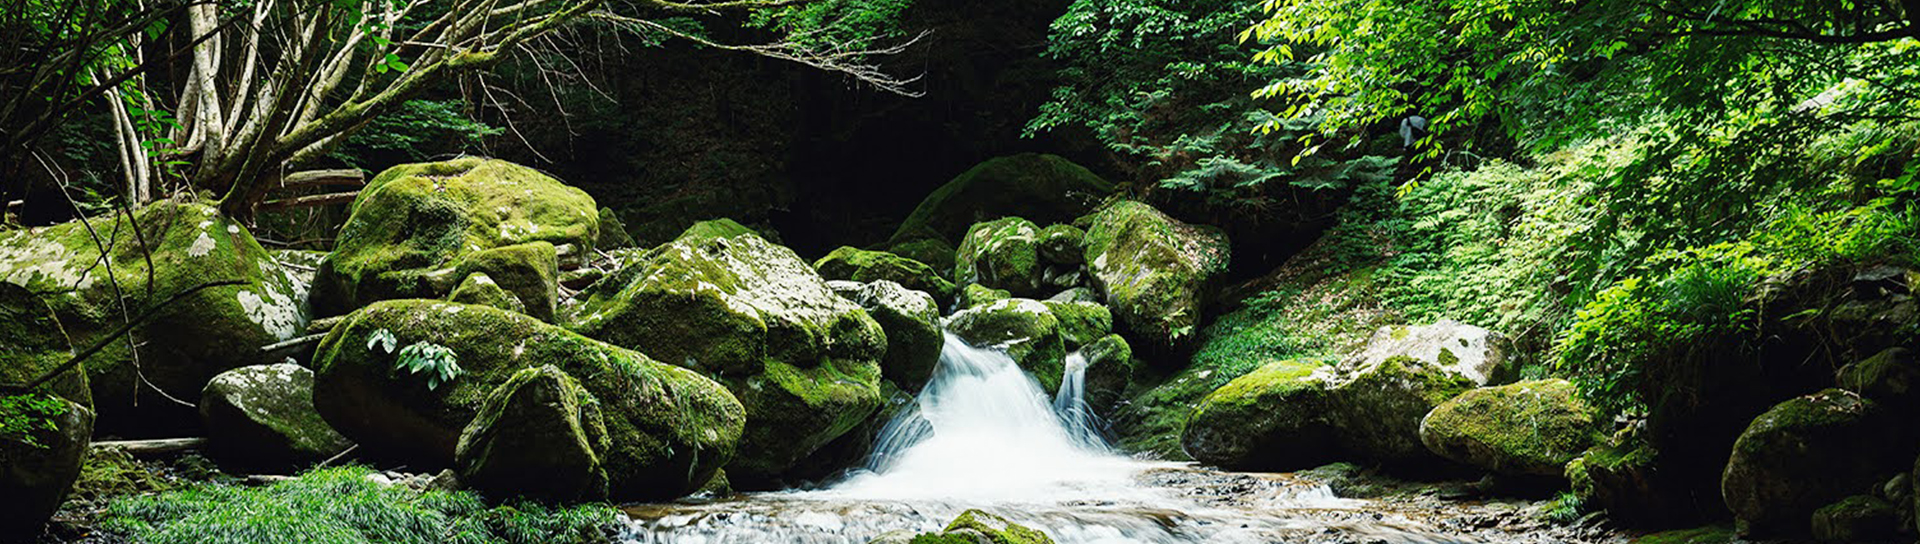 small stream surrounded by mossy rocks and trees